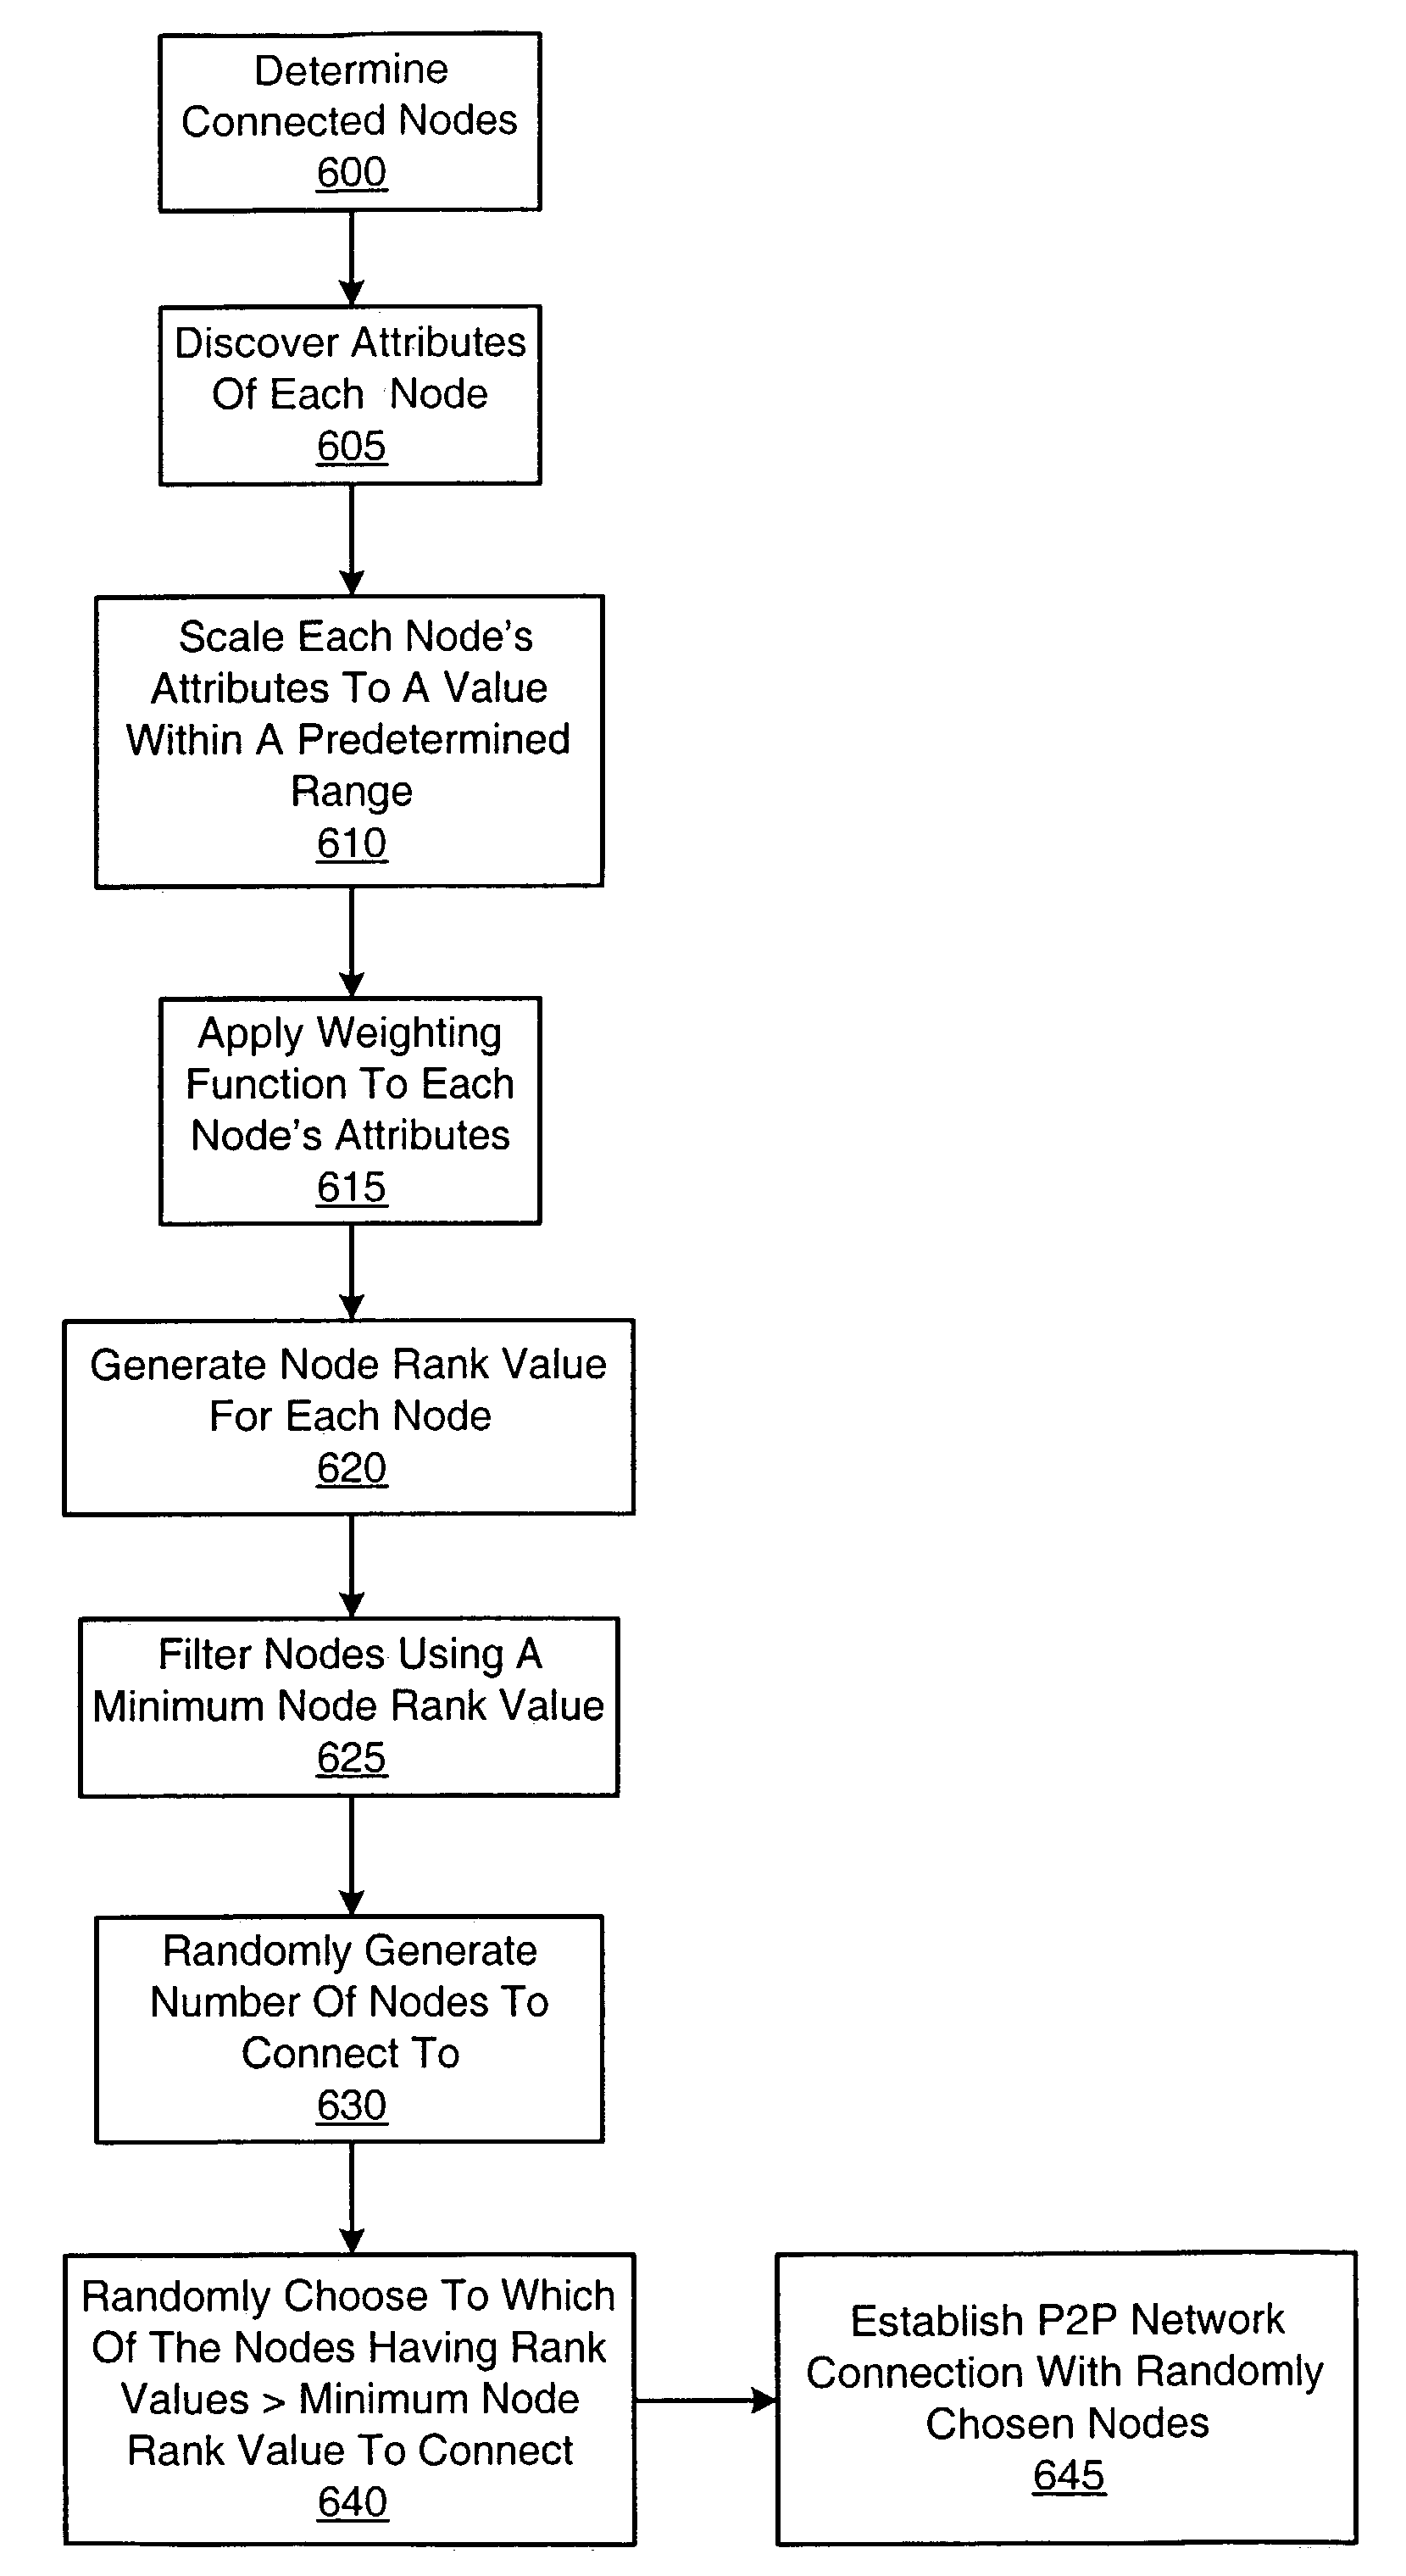 Method and system for creating a peer-to-peer overlay network